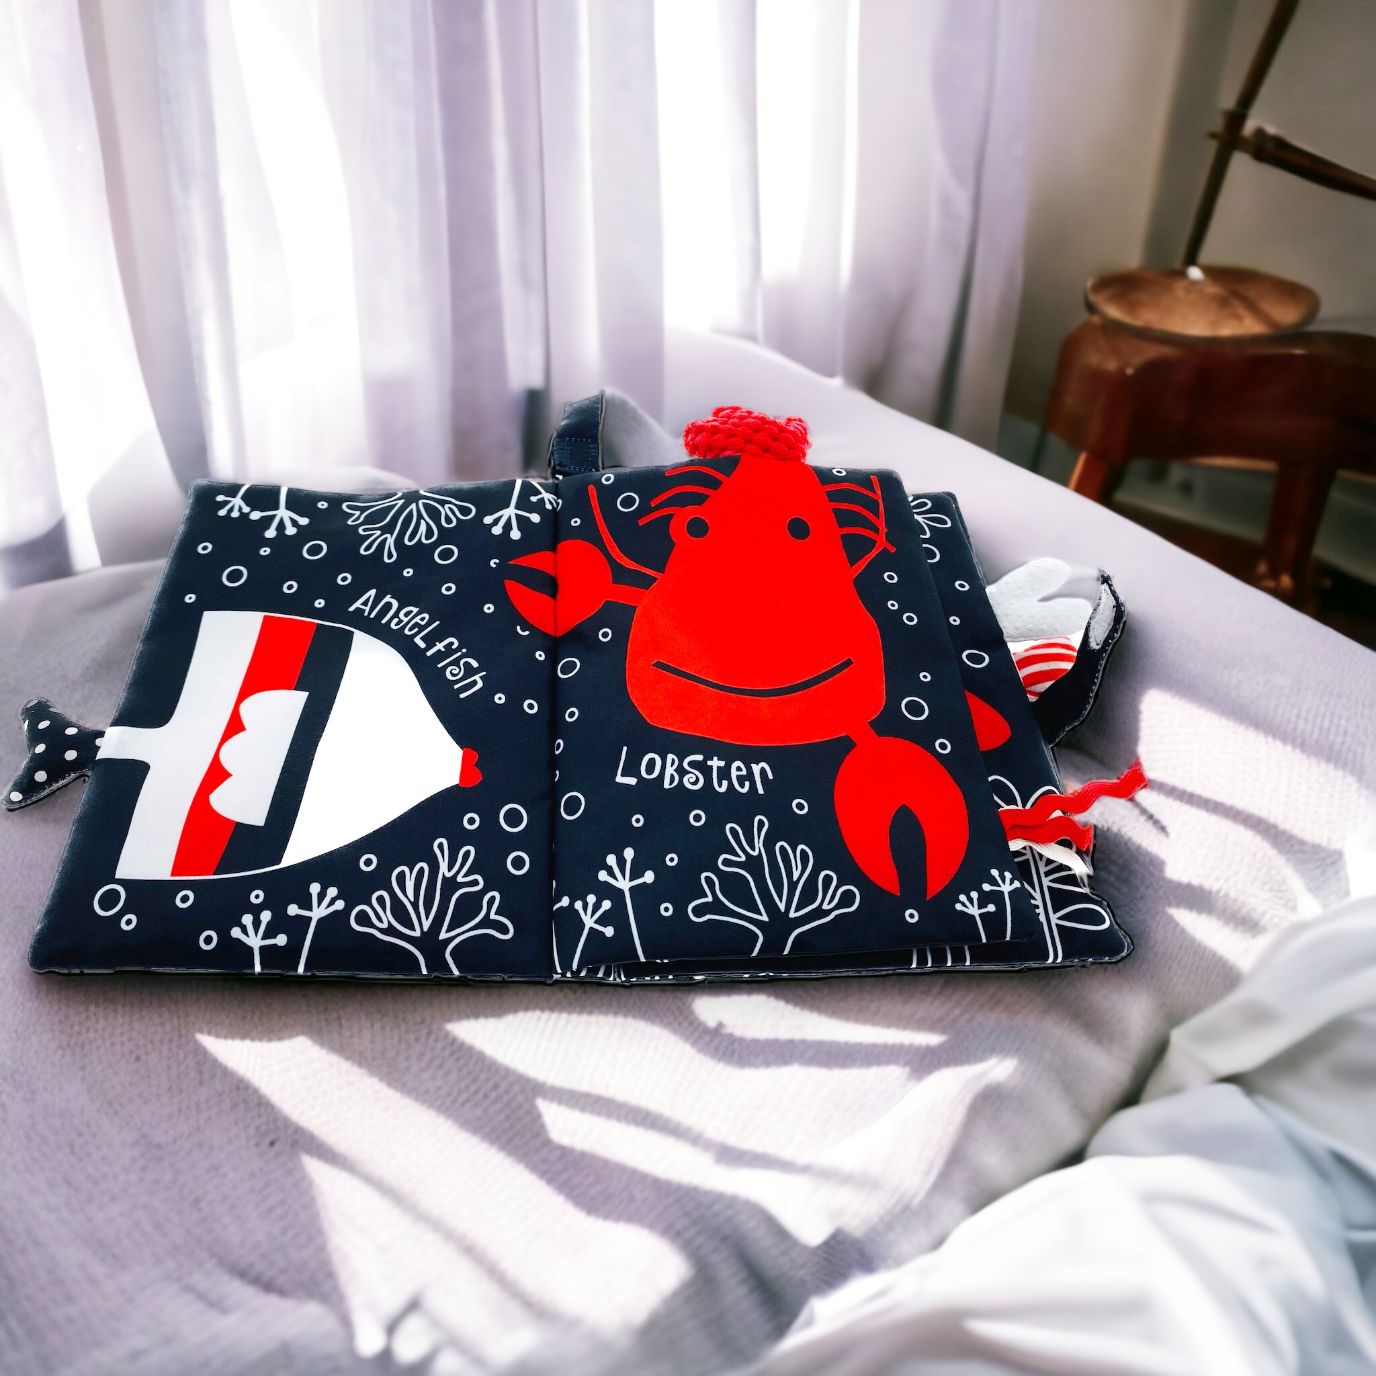 Baby Cloth Black White Red book. Sensory tail series